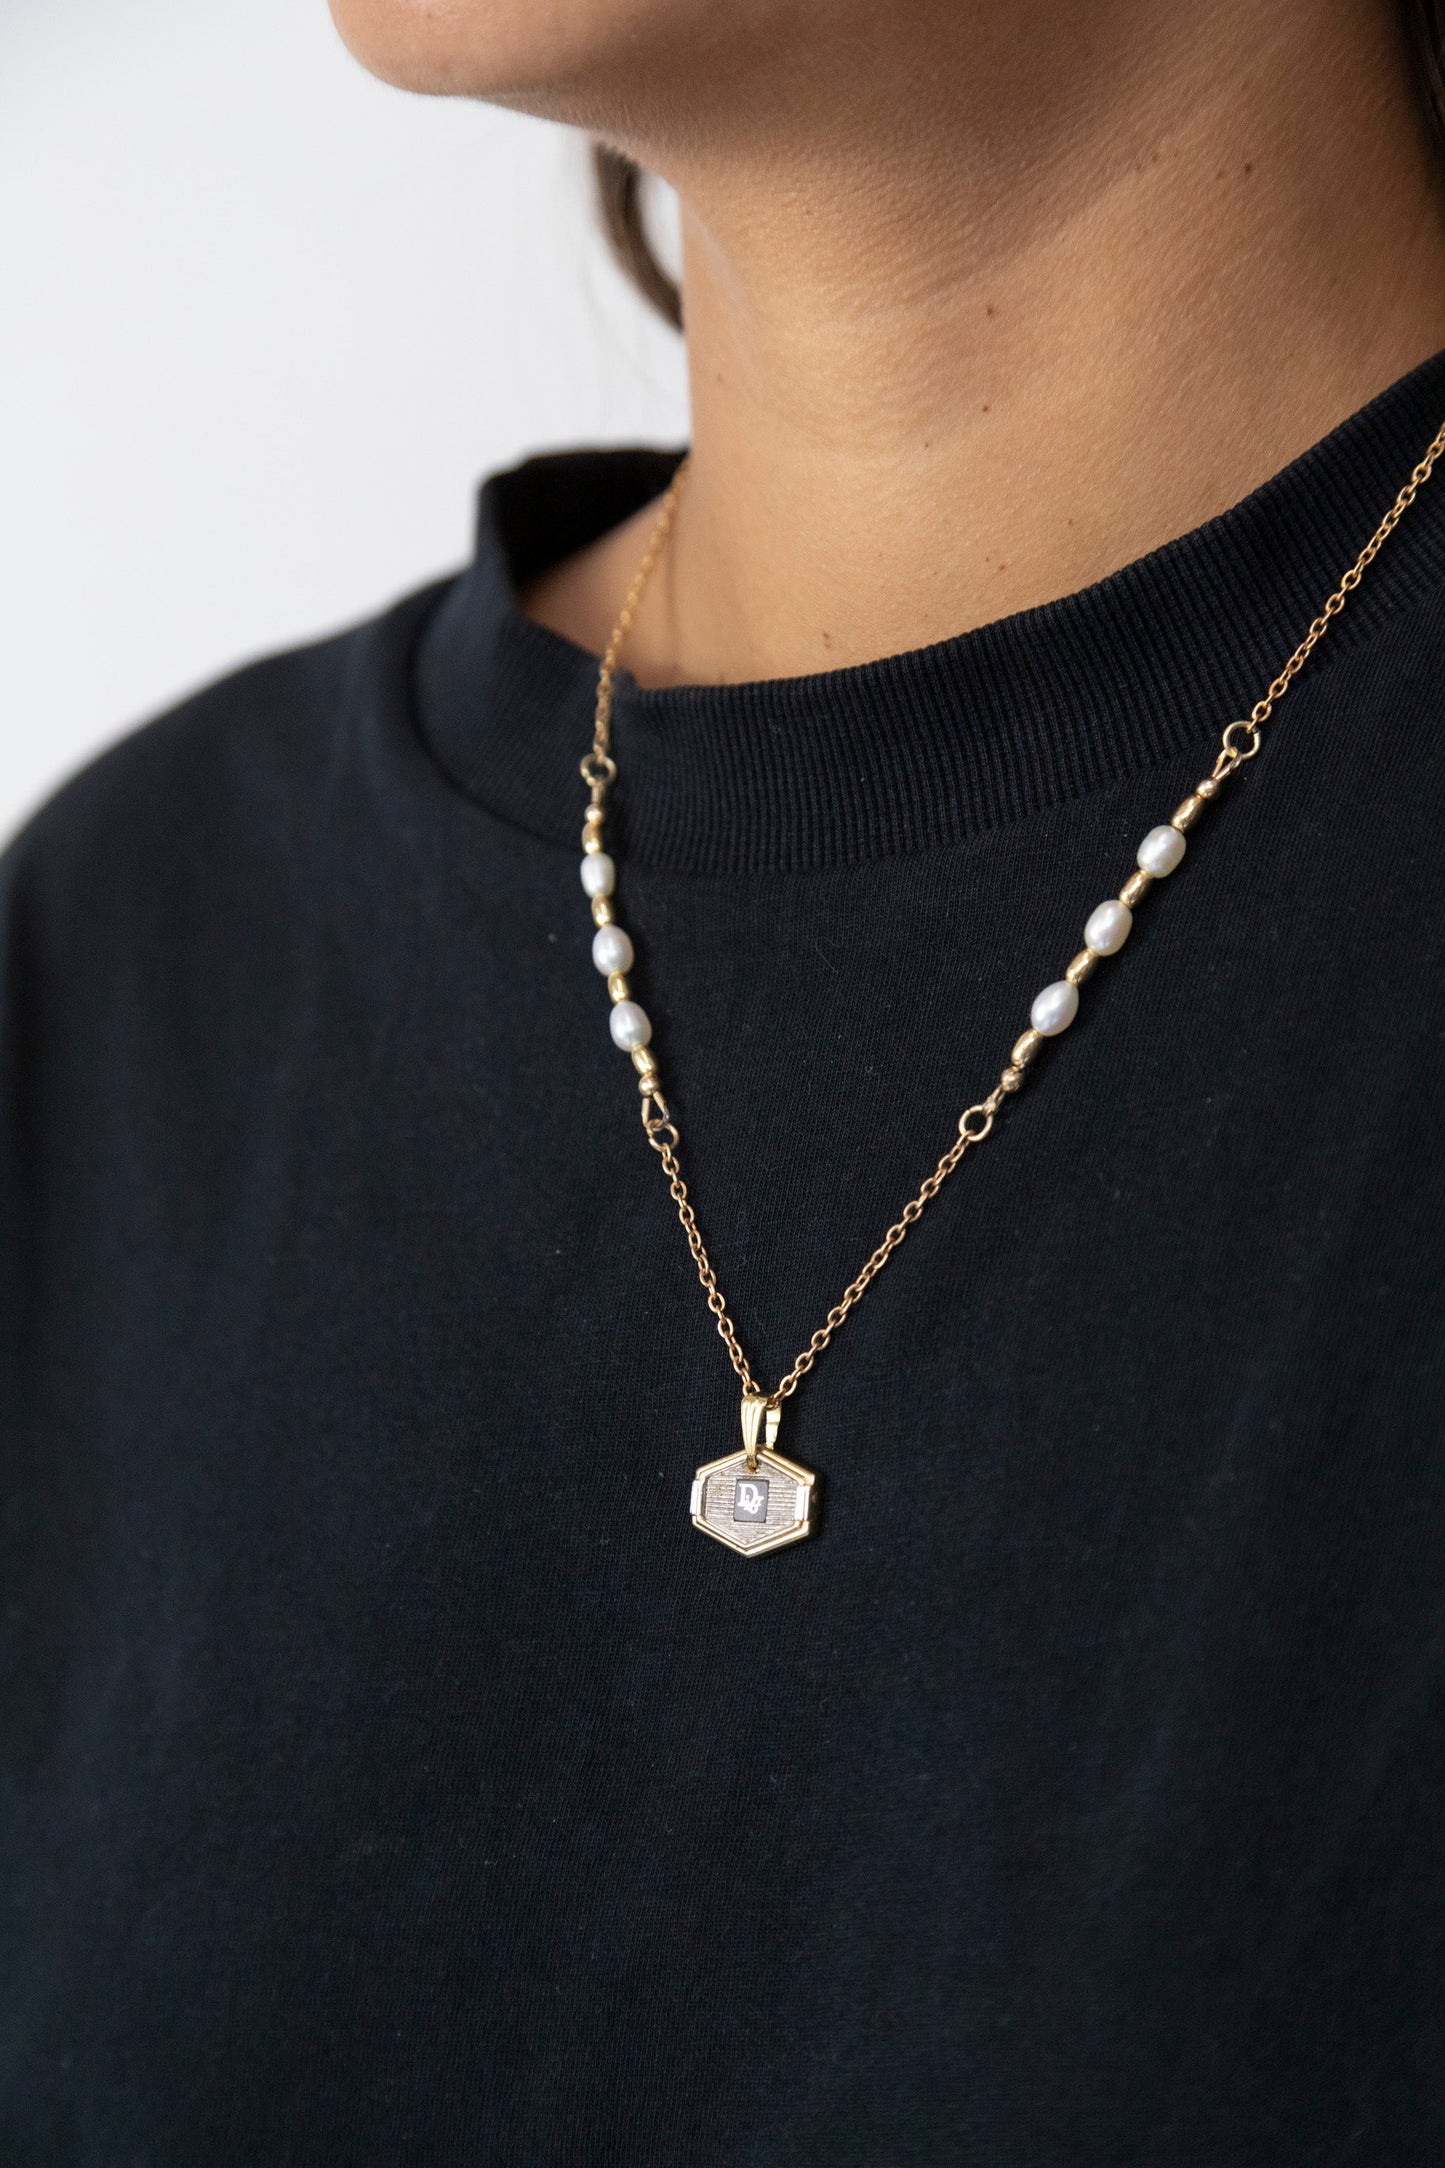 VT Rework: Christian Dior Hexagonal Logo Gold Pearled Link Chain Necklace